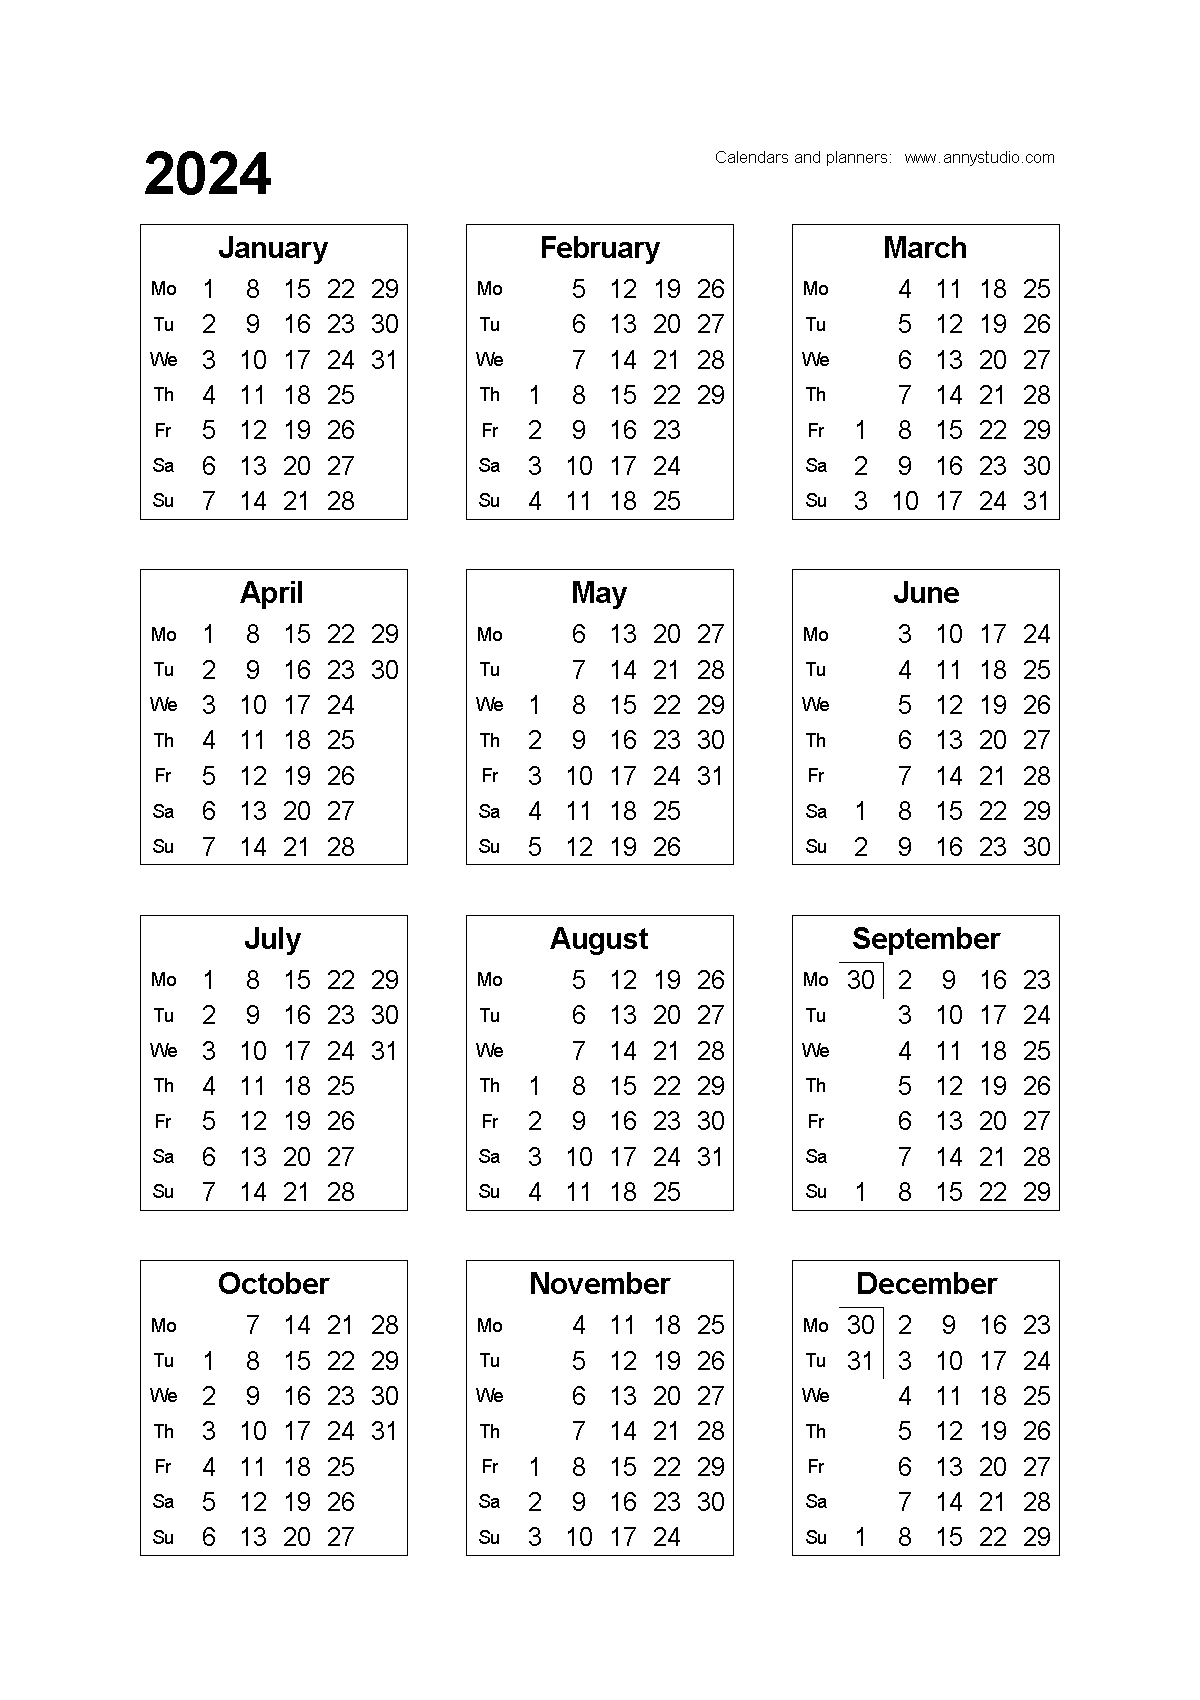 Free Printable Calendars And Planners 2023 And 2024 | Free | Yearly Calendar 2024 Uk Printable